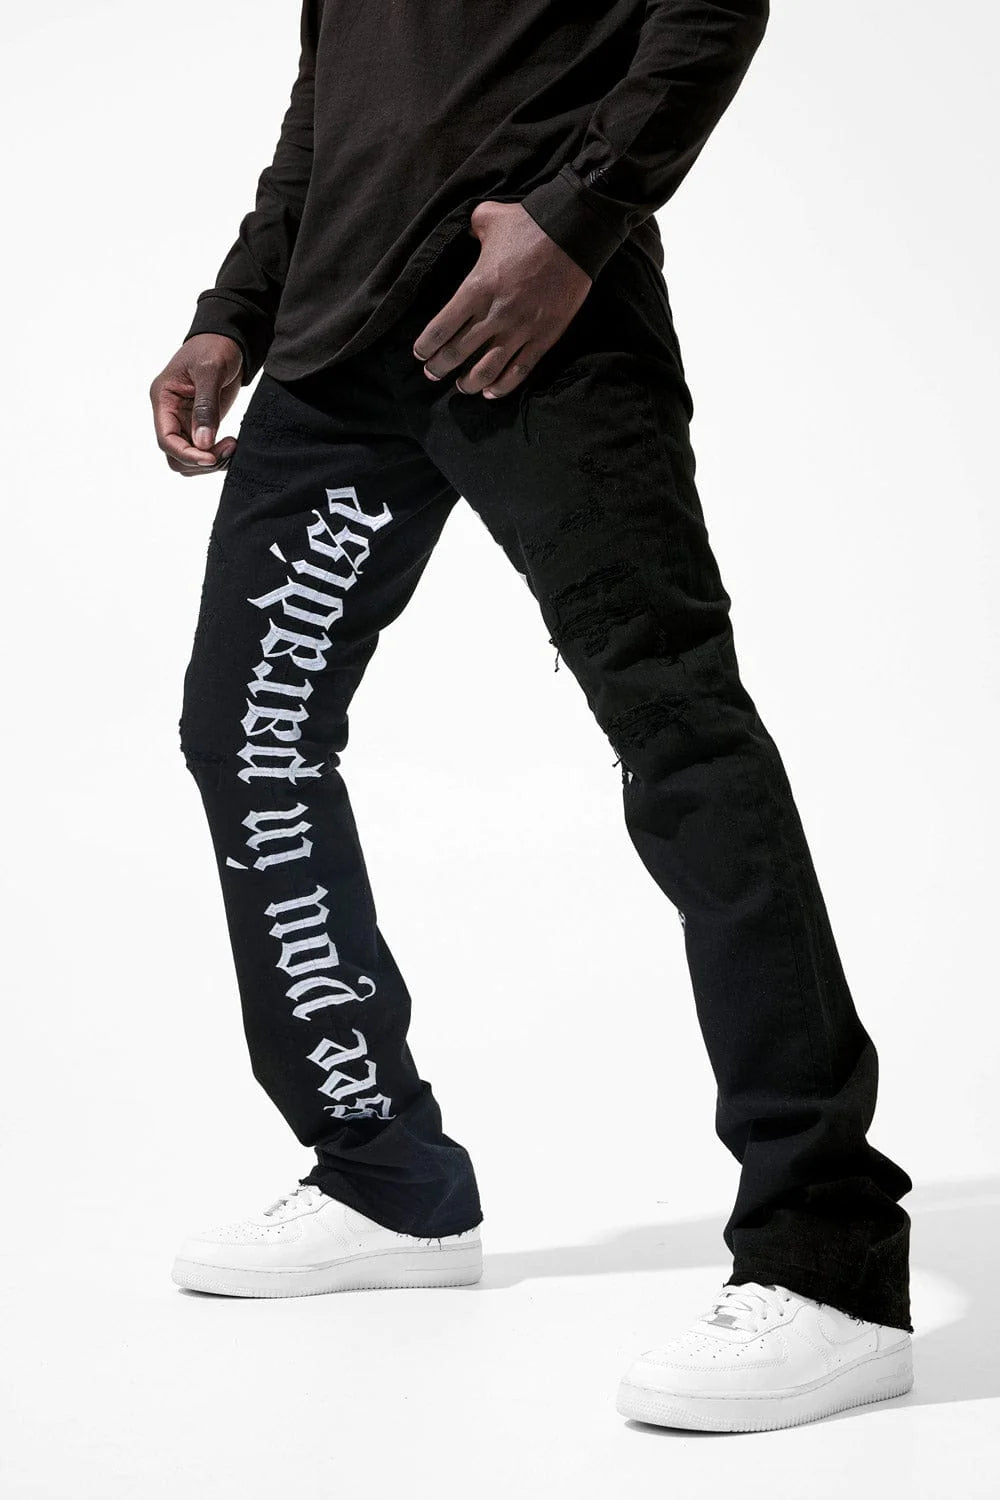 Martin Stacked - See You In Paradise Denim Jeans - Jet Black